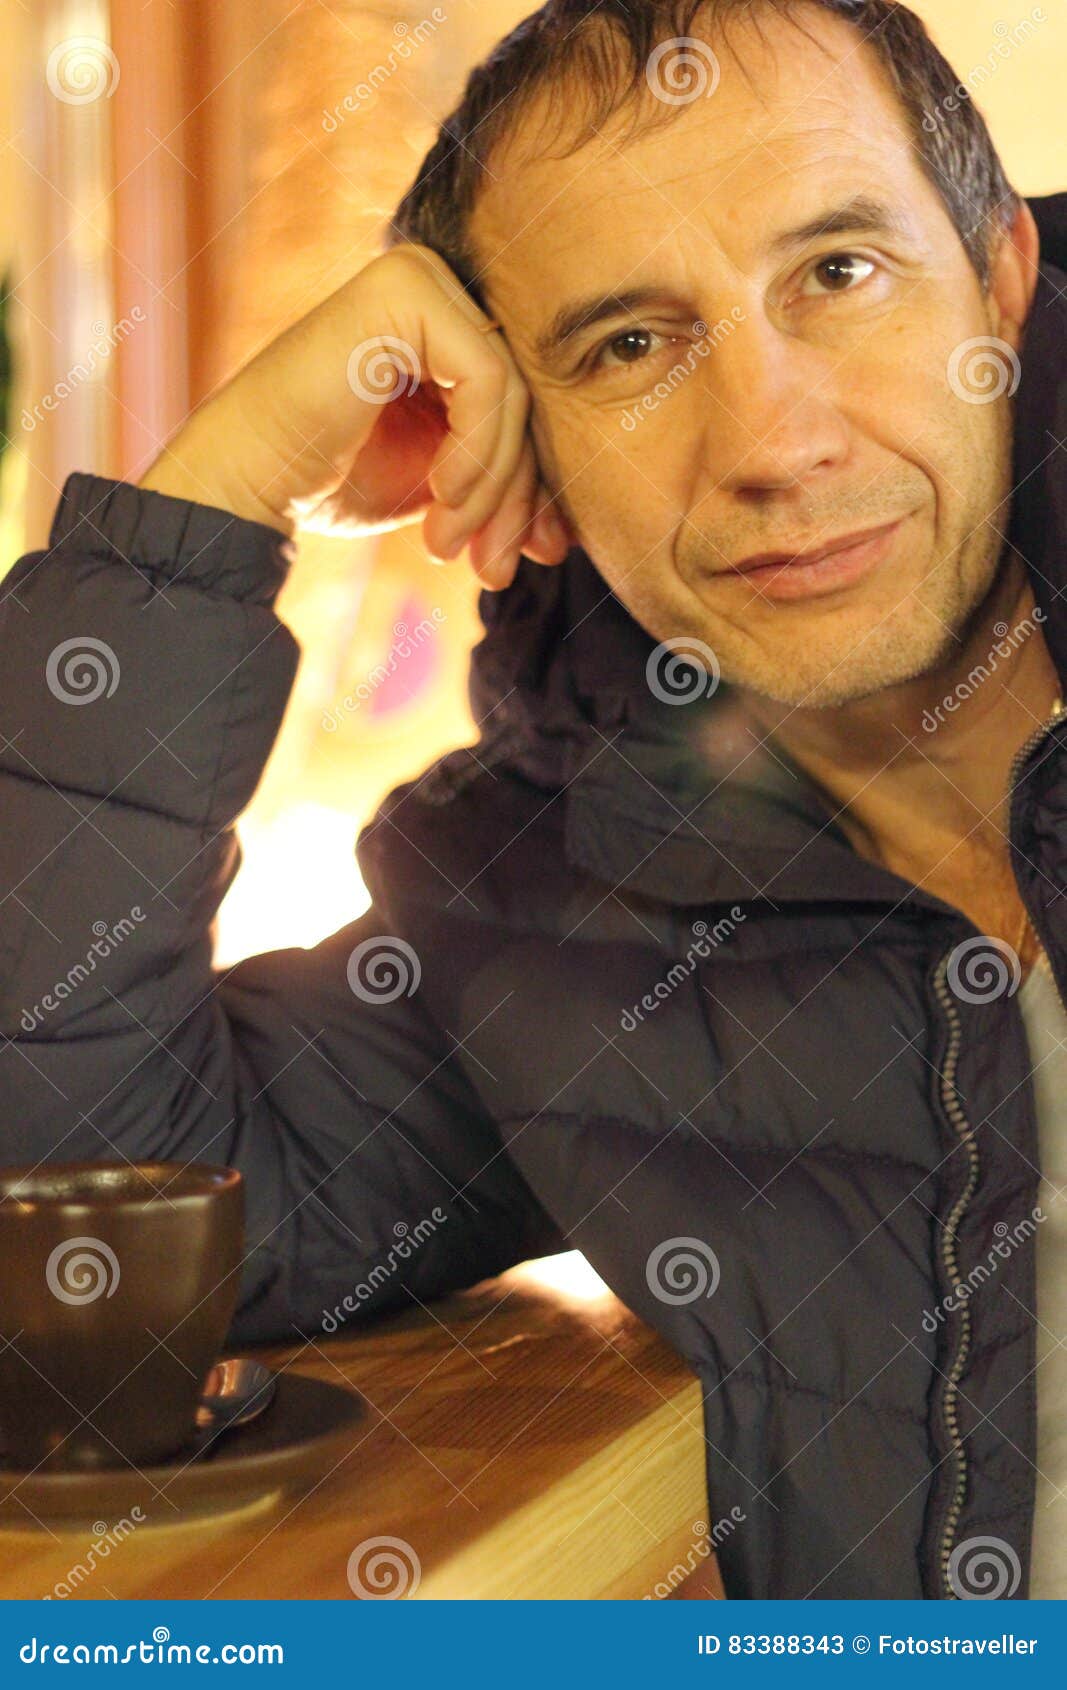 Thoughtfully In A Cafe With A Cup Of Coffee Stock Image - Image of ...
